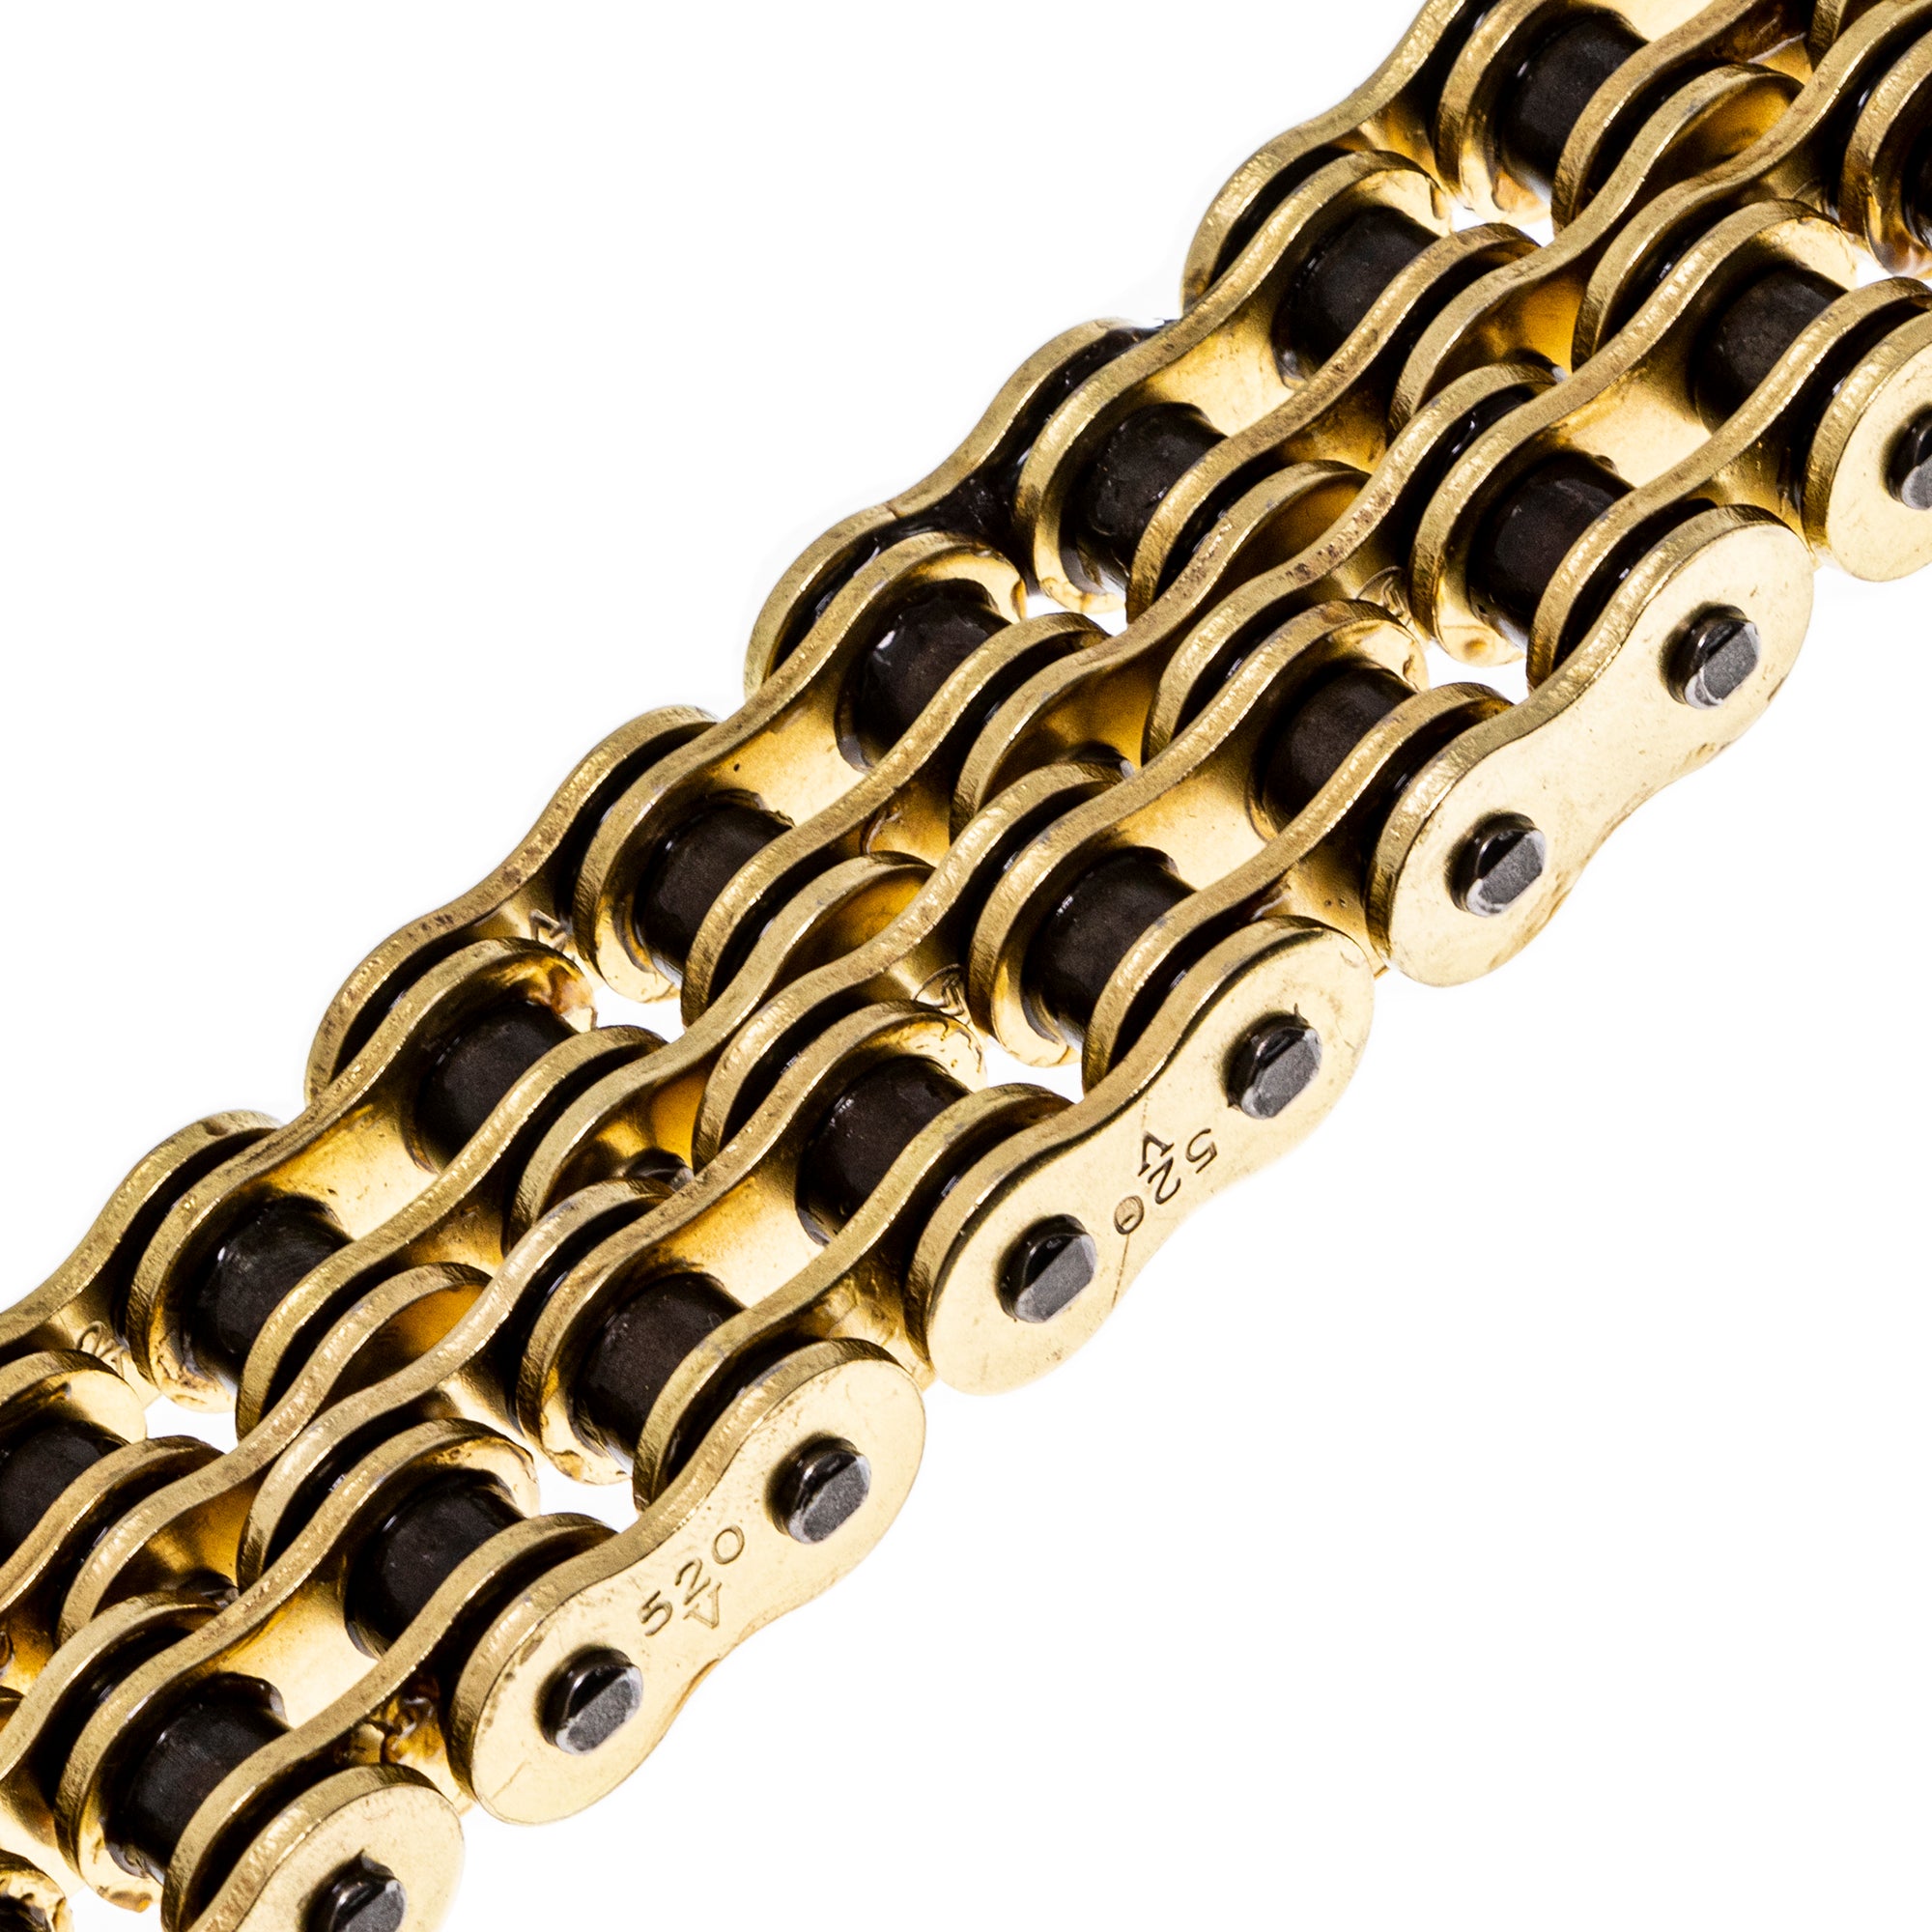 Gold X-Ring Chain 68 w/ Master Link for zOTHER Magnum 5504 NICHE 519-CDC2515H